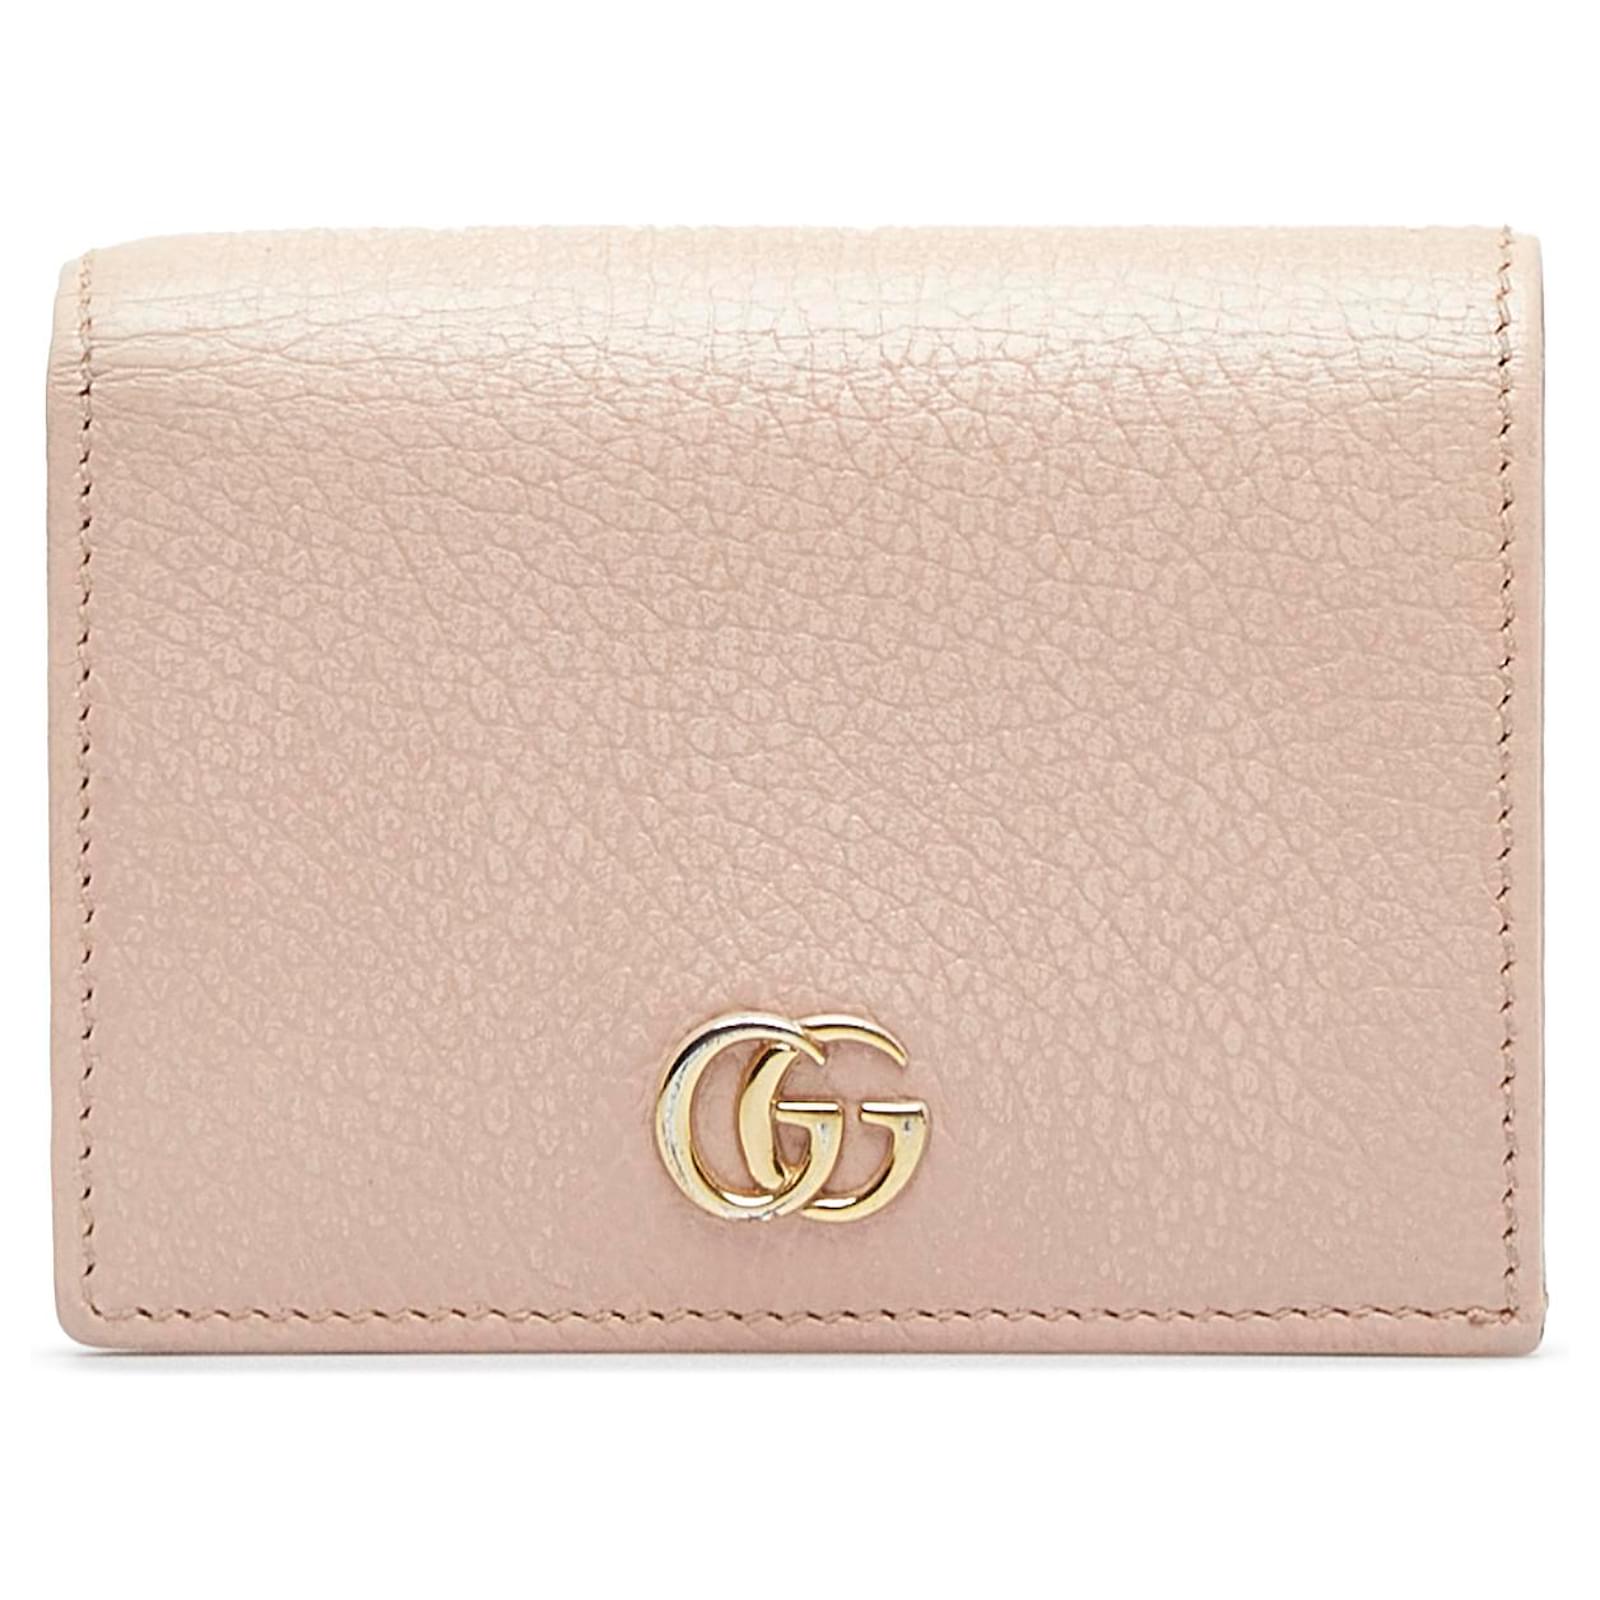 Dusty Pink Leather GG Marmont Card Case Wallet